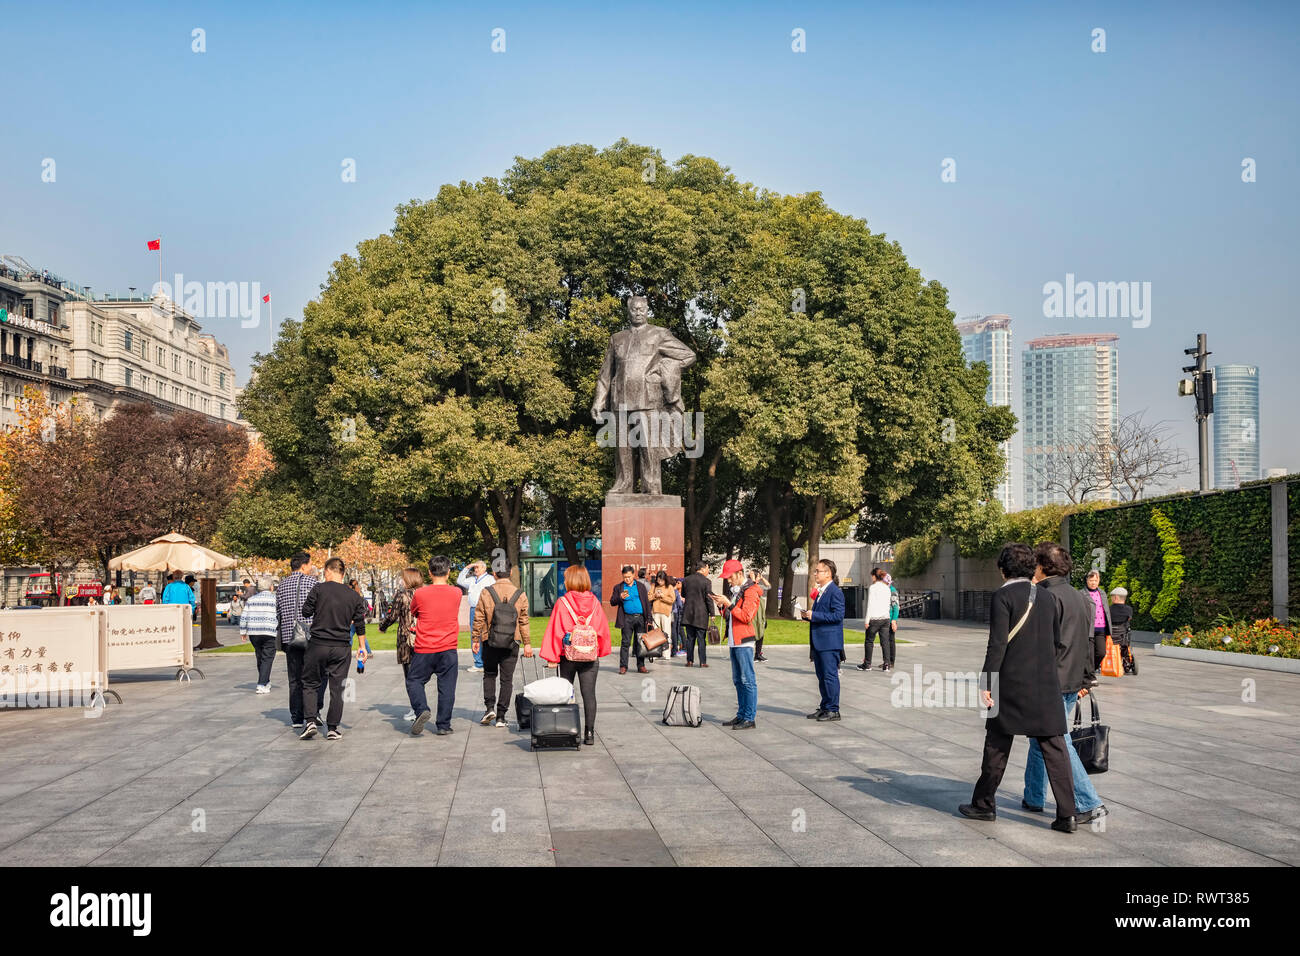 29 November 2018: Shanghai, China - Visitors at the statue of Chen Yi in Chenyi Square on The Bund, beside the Huangpu River, Shanghai. Stock Photo